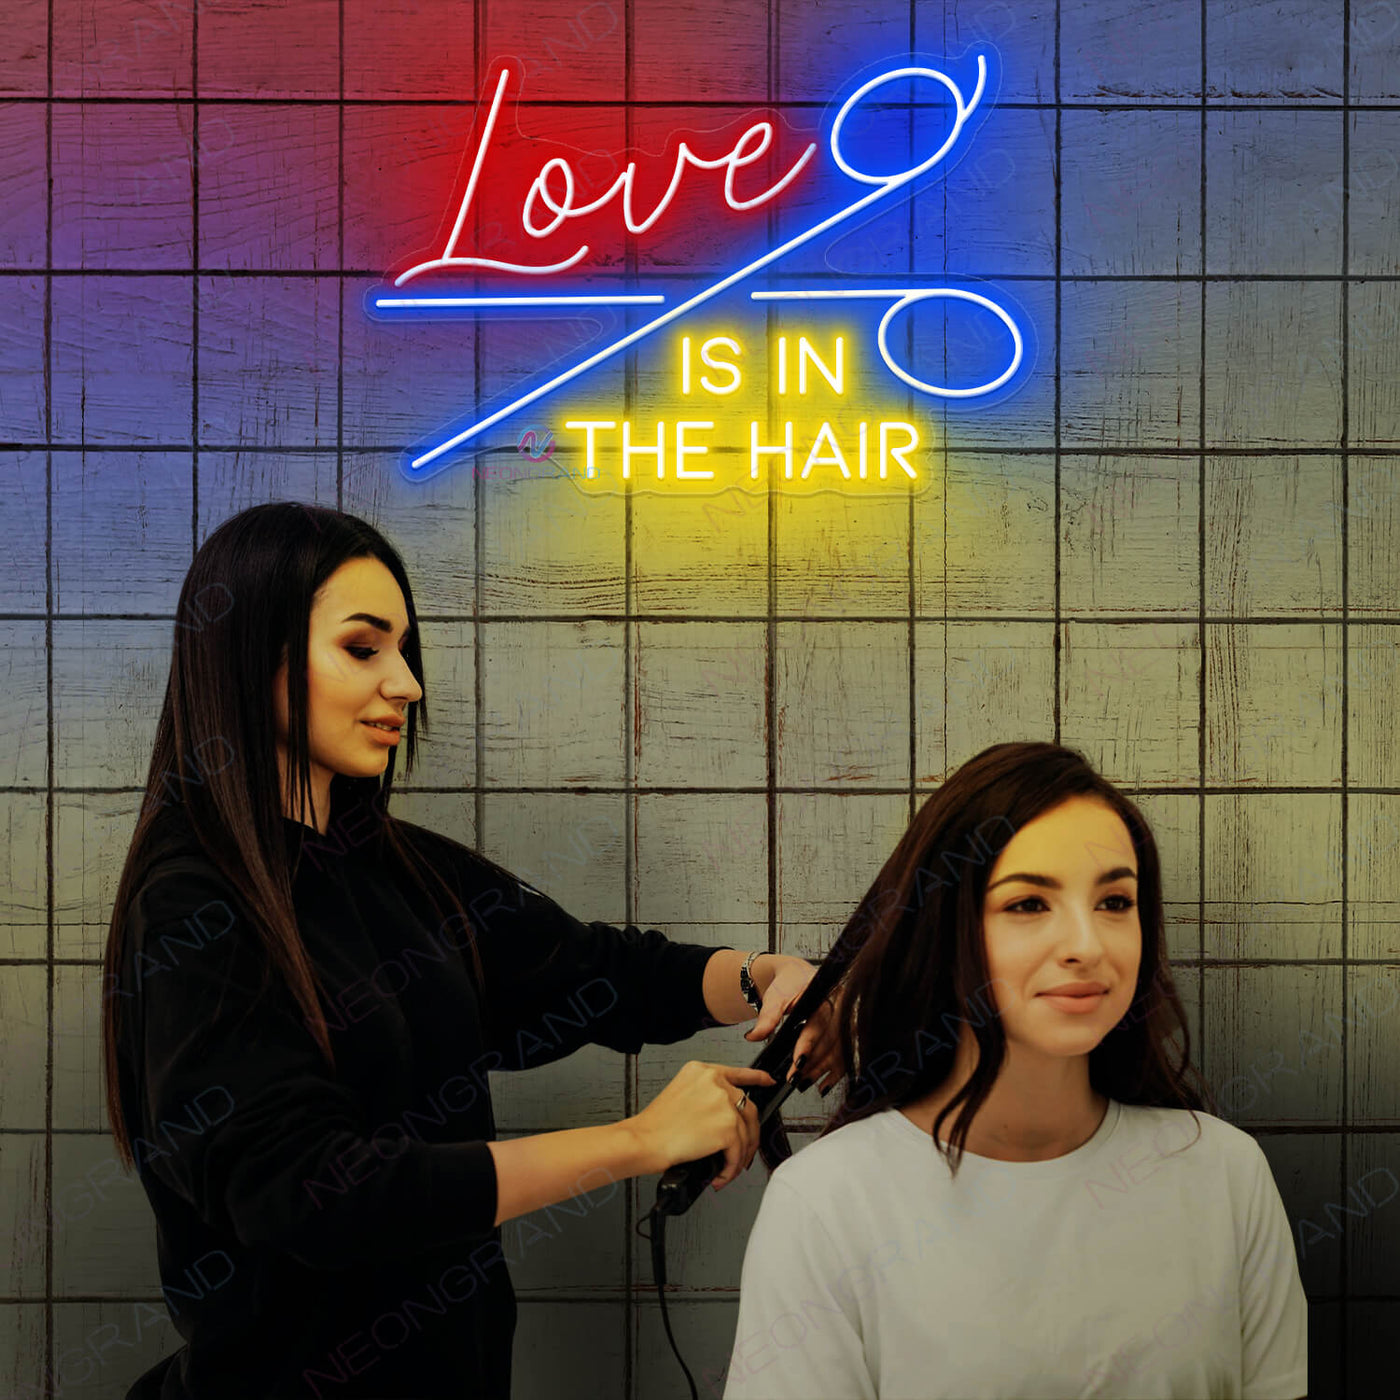 Hair Salon Neon Signs Business Led Light Love Is In The Hair red